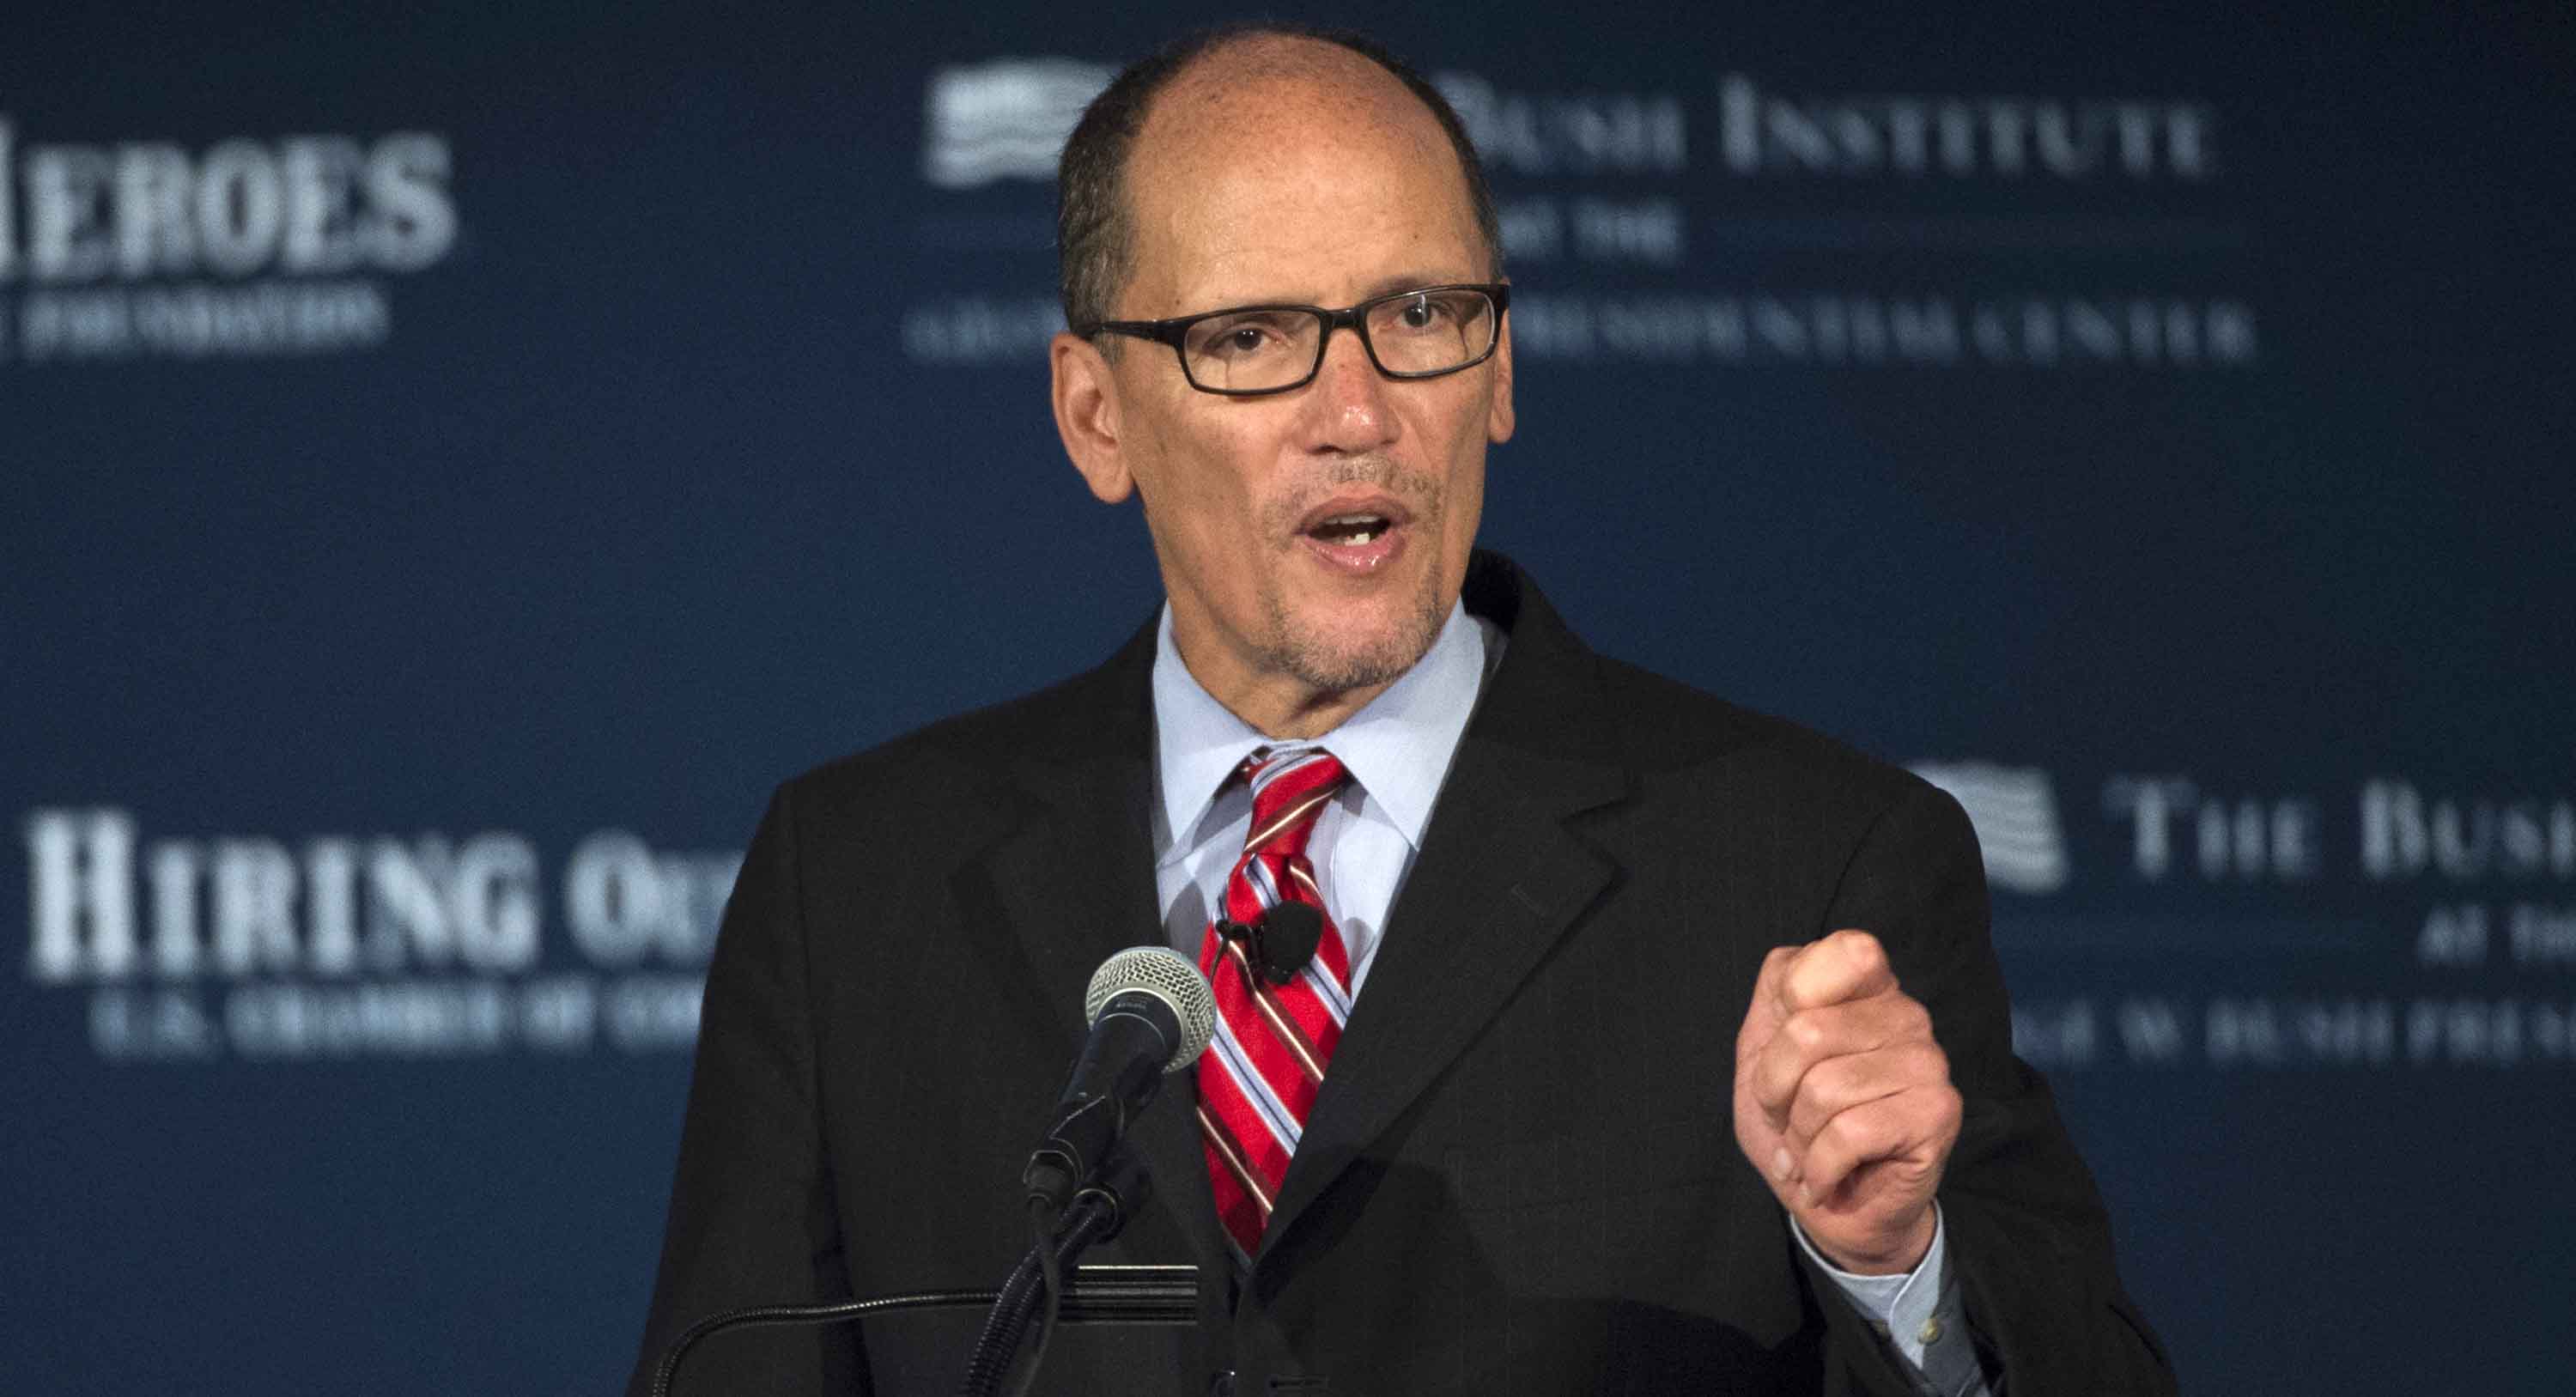 Labor Secretary Thomas Perez speaks at the U.S. Chamber of Commerce Foundation's Hiring Our Heroes program and the George W. Bush Institute's Military Service Initiative national summit, Wednesday, June 24, 2015, at the U.S. Chamber of Commerce in Washington. The summit  focuses on creating employment opportunities for post-9/11 veterans and military families.  (AP Photo/Molly Riley)